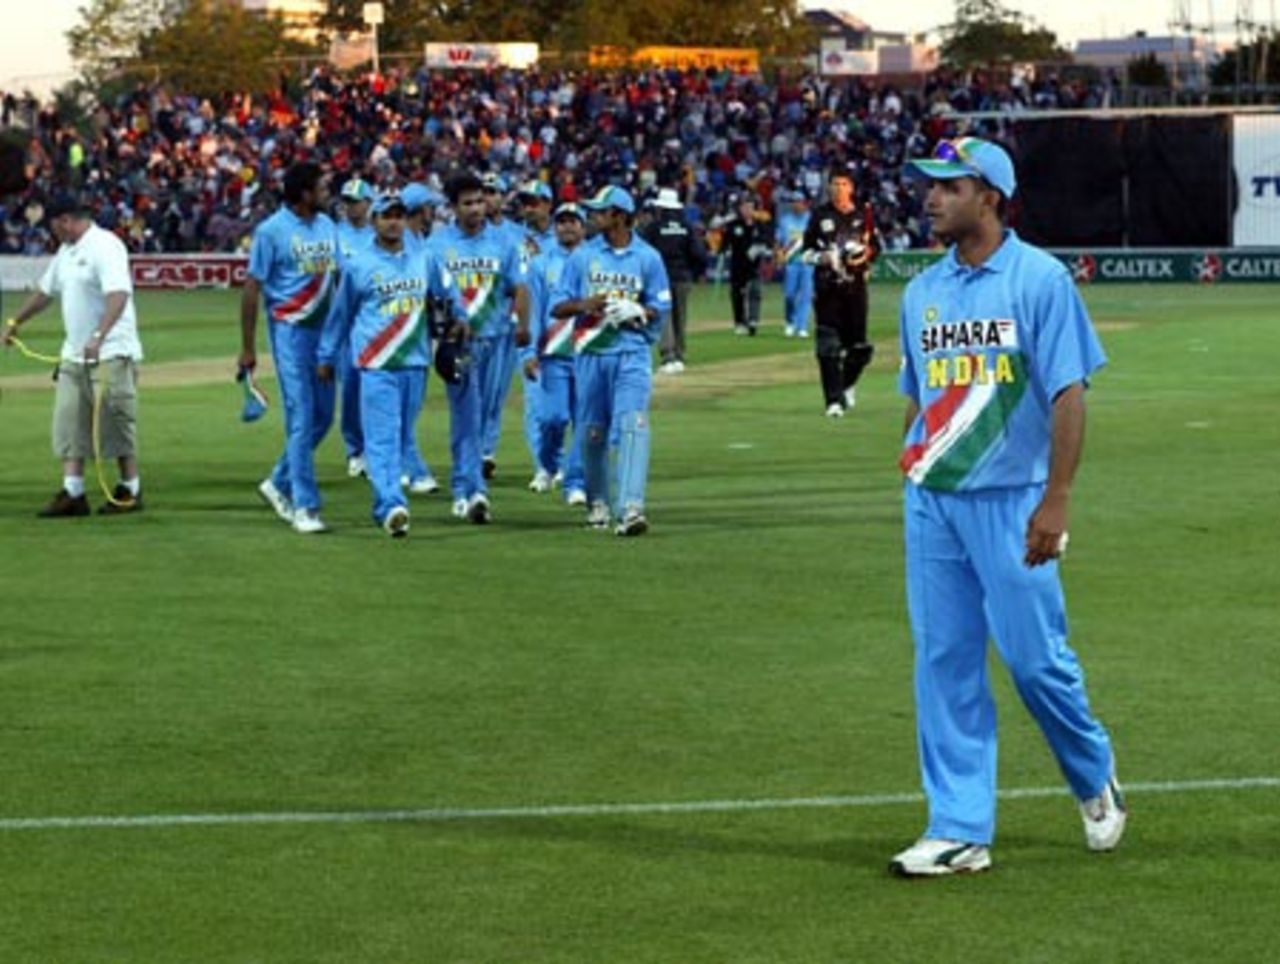 Indian captain Sourav Ganguly (right) leaves the field at the end of the match, followed by his team-mates and New Zealand batsmen. India lost the match by six wickets and lost the seven-match series 5-2. 7th ODI: New Zealand v India at Westpac Park, Hamilton, 14 January 2003.